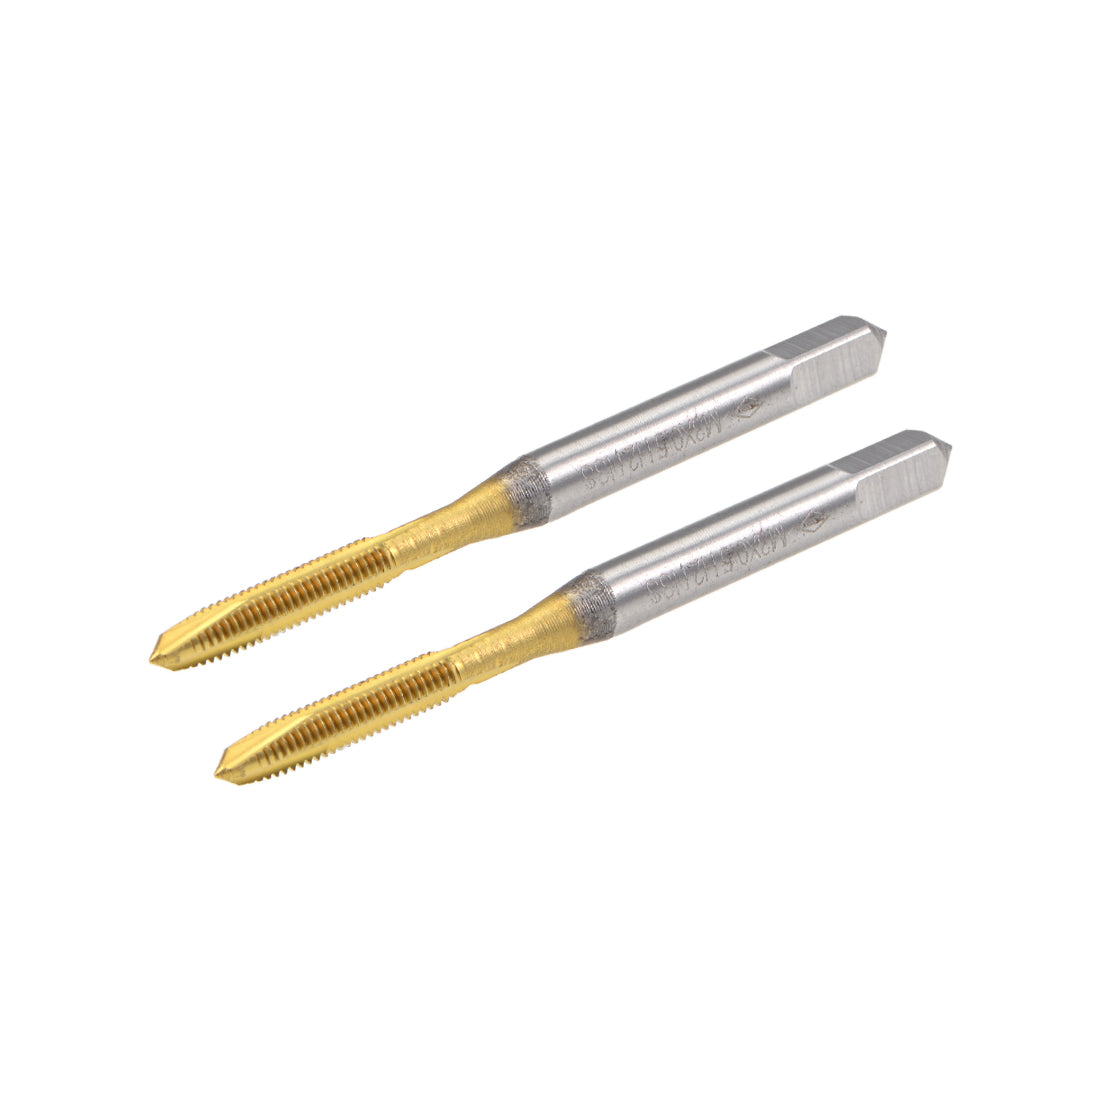 uxcell Uxcell Spiral Point Threading Tap M3 Thread 0.5 Pitch Titanium Coated HSS 2pcs